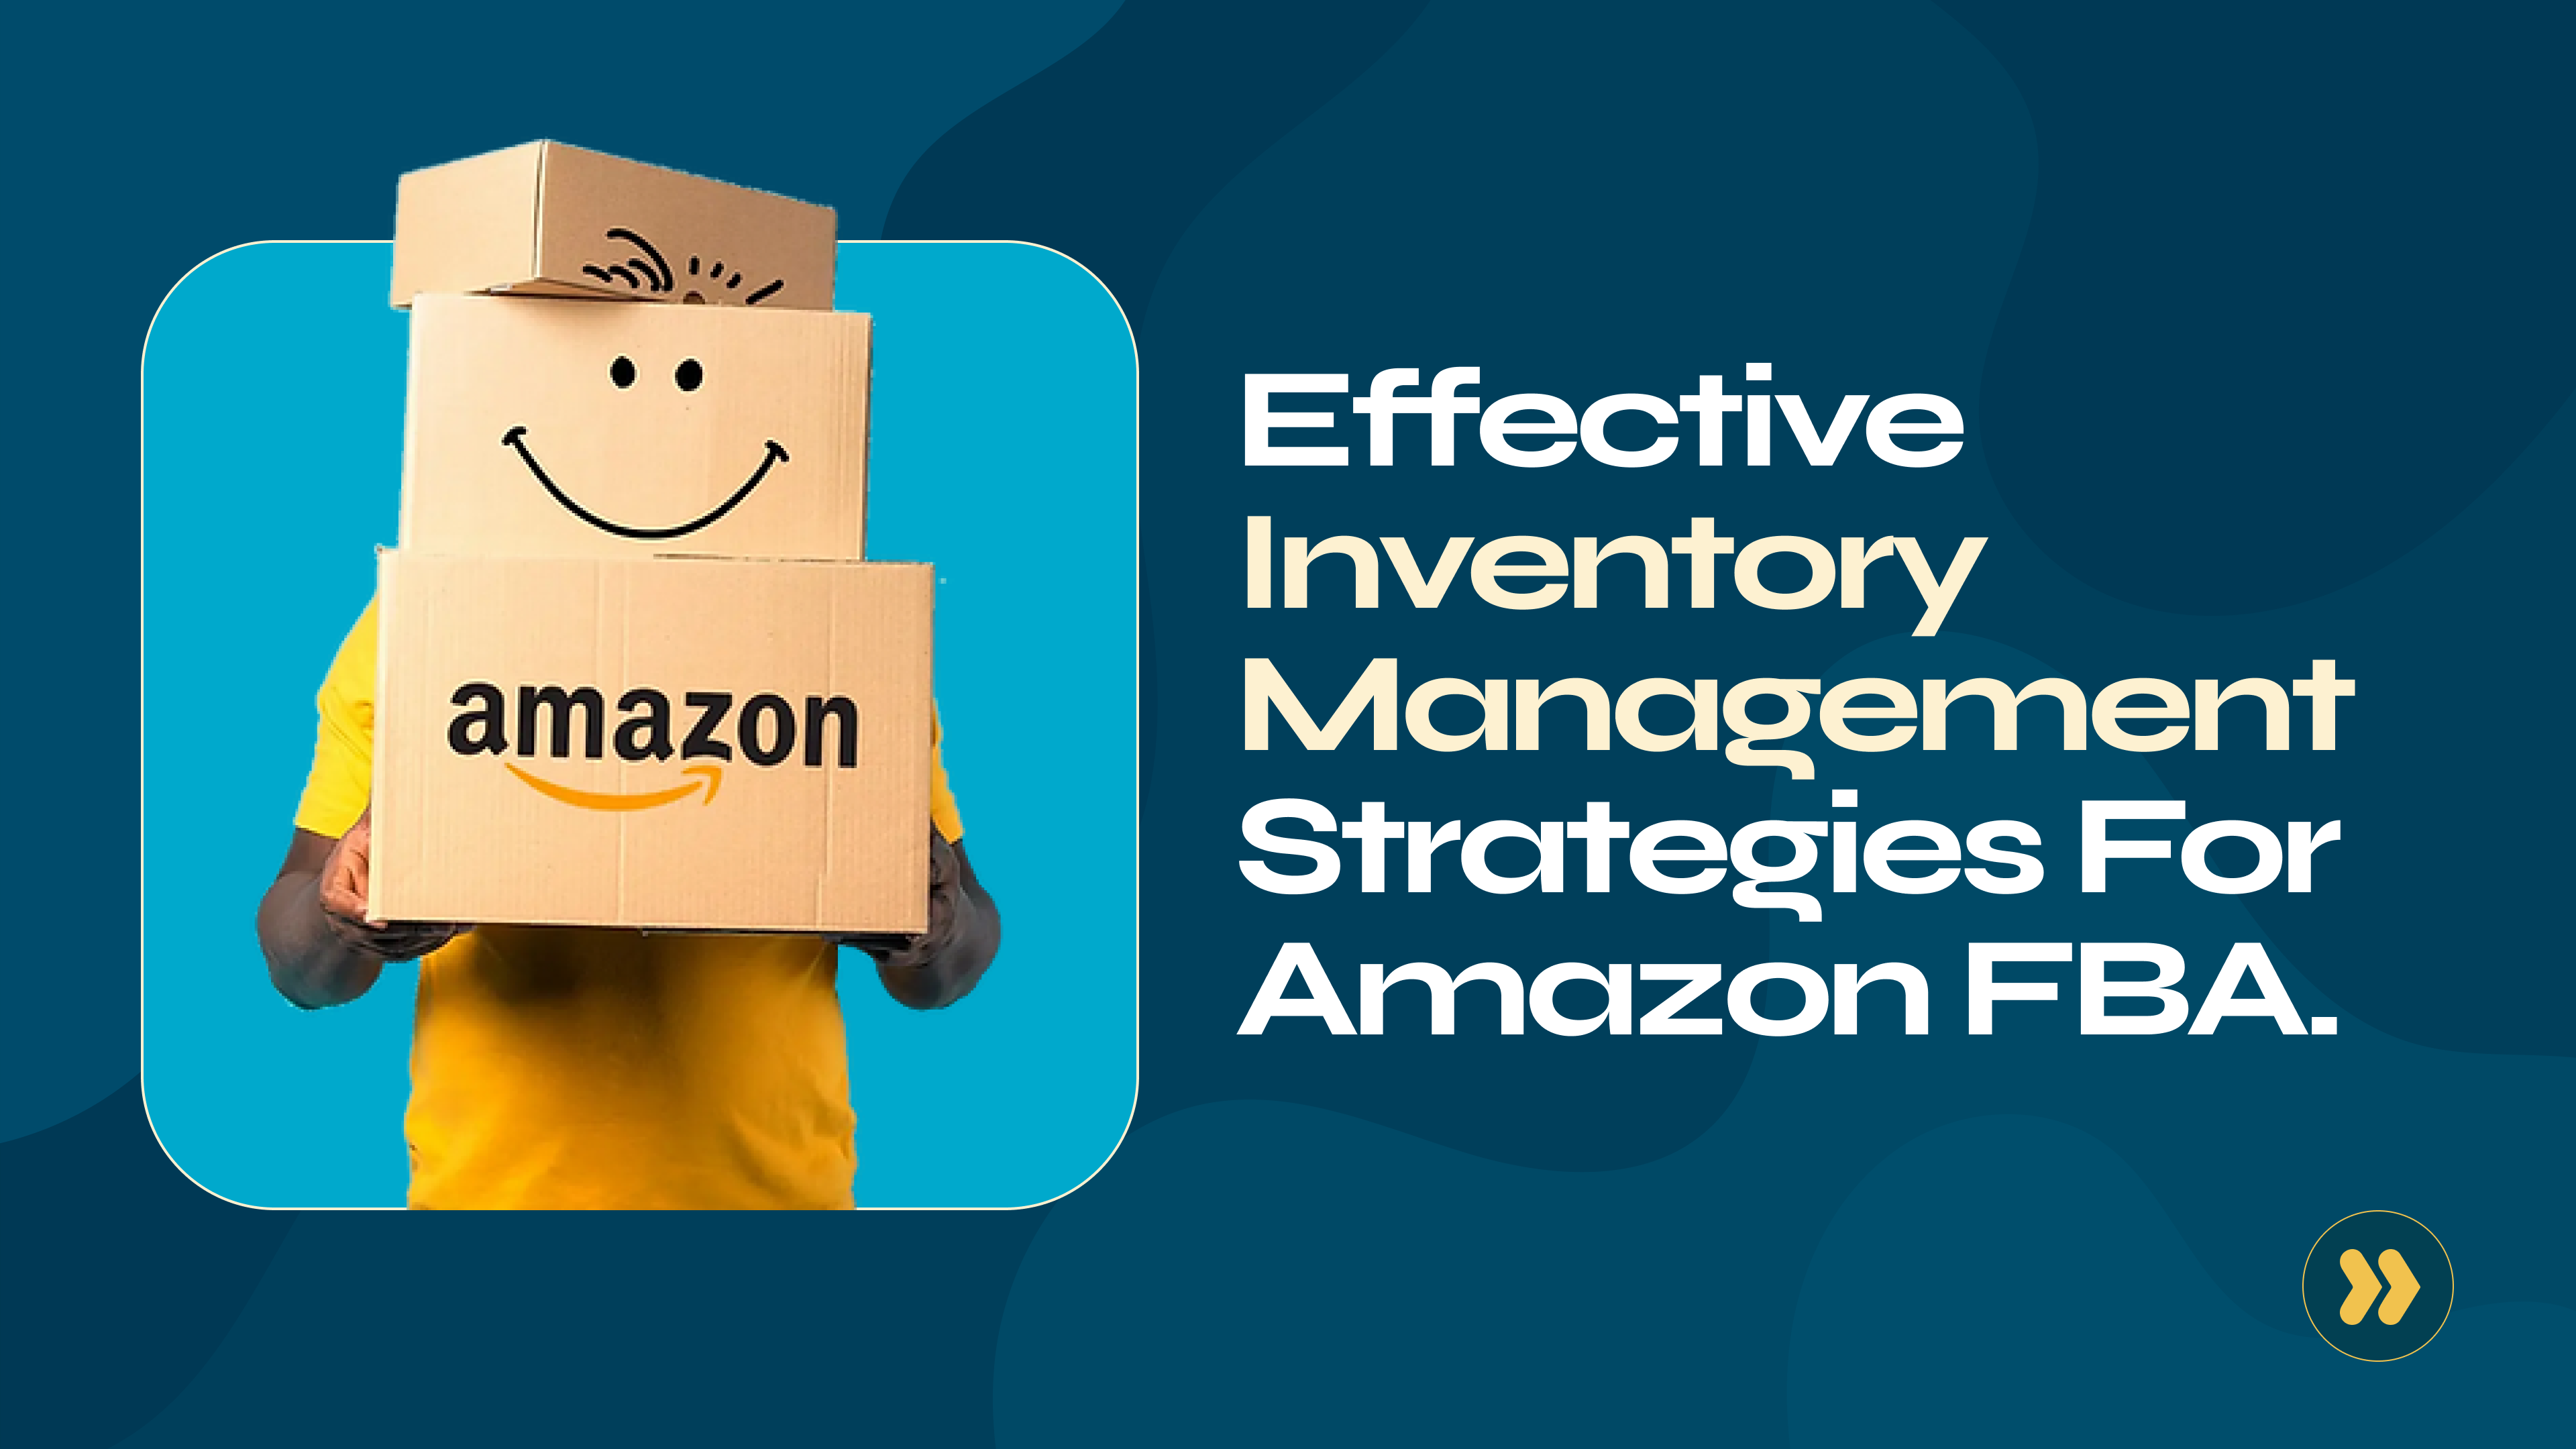 Effective inventory management strategies for Amazon FBA